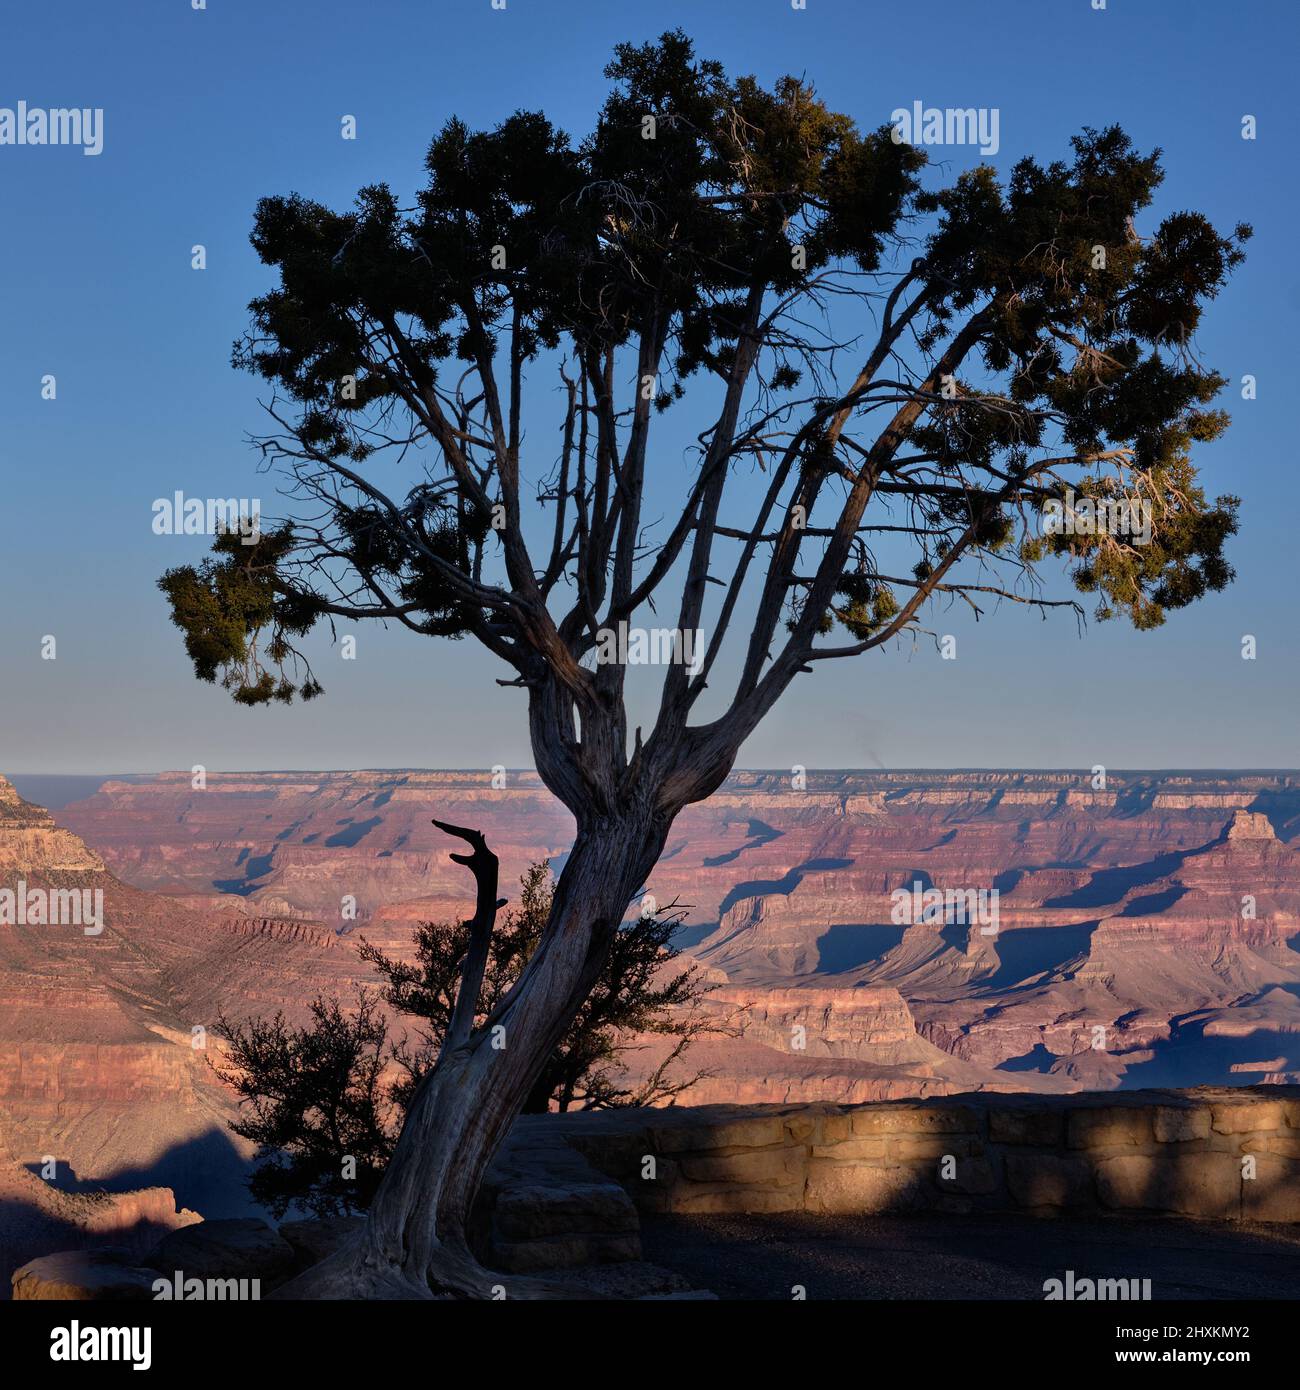 Interesting tree at Grand Canyon's Grandview Point. While Canyon forms background for half of tree, the top part is against clear blue, cloudless sky Stock Photo